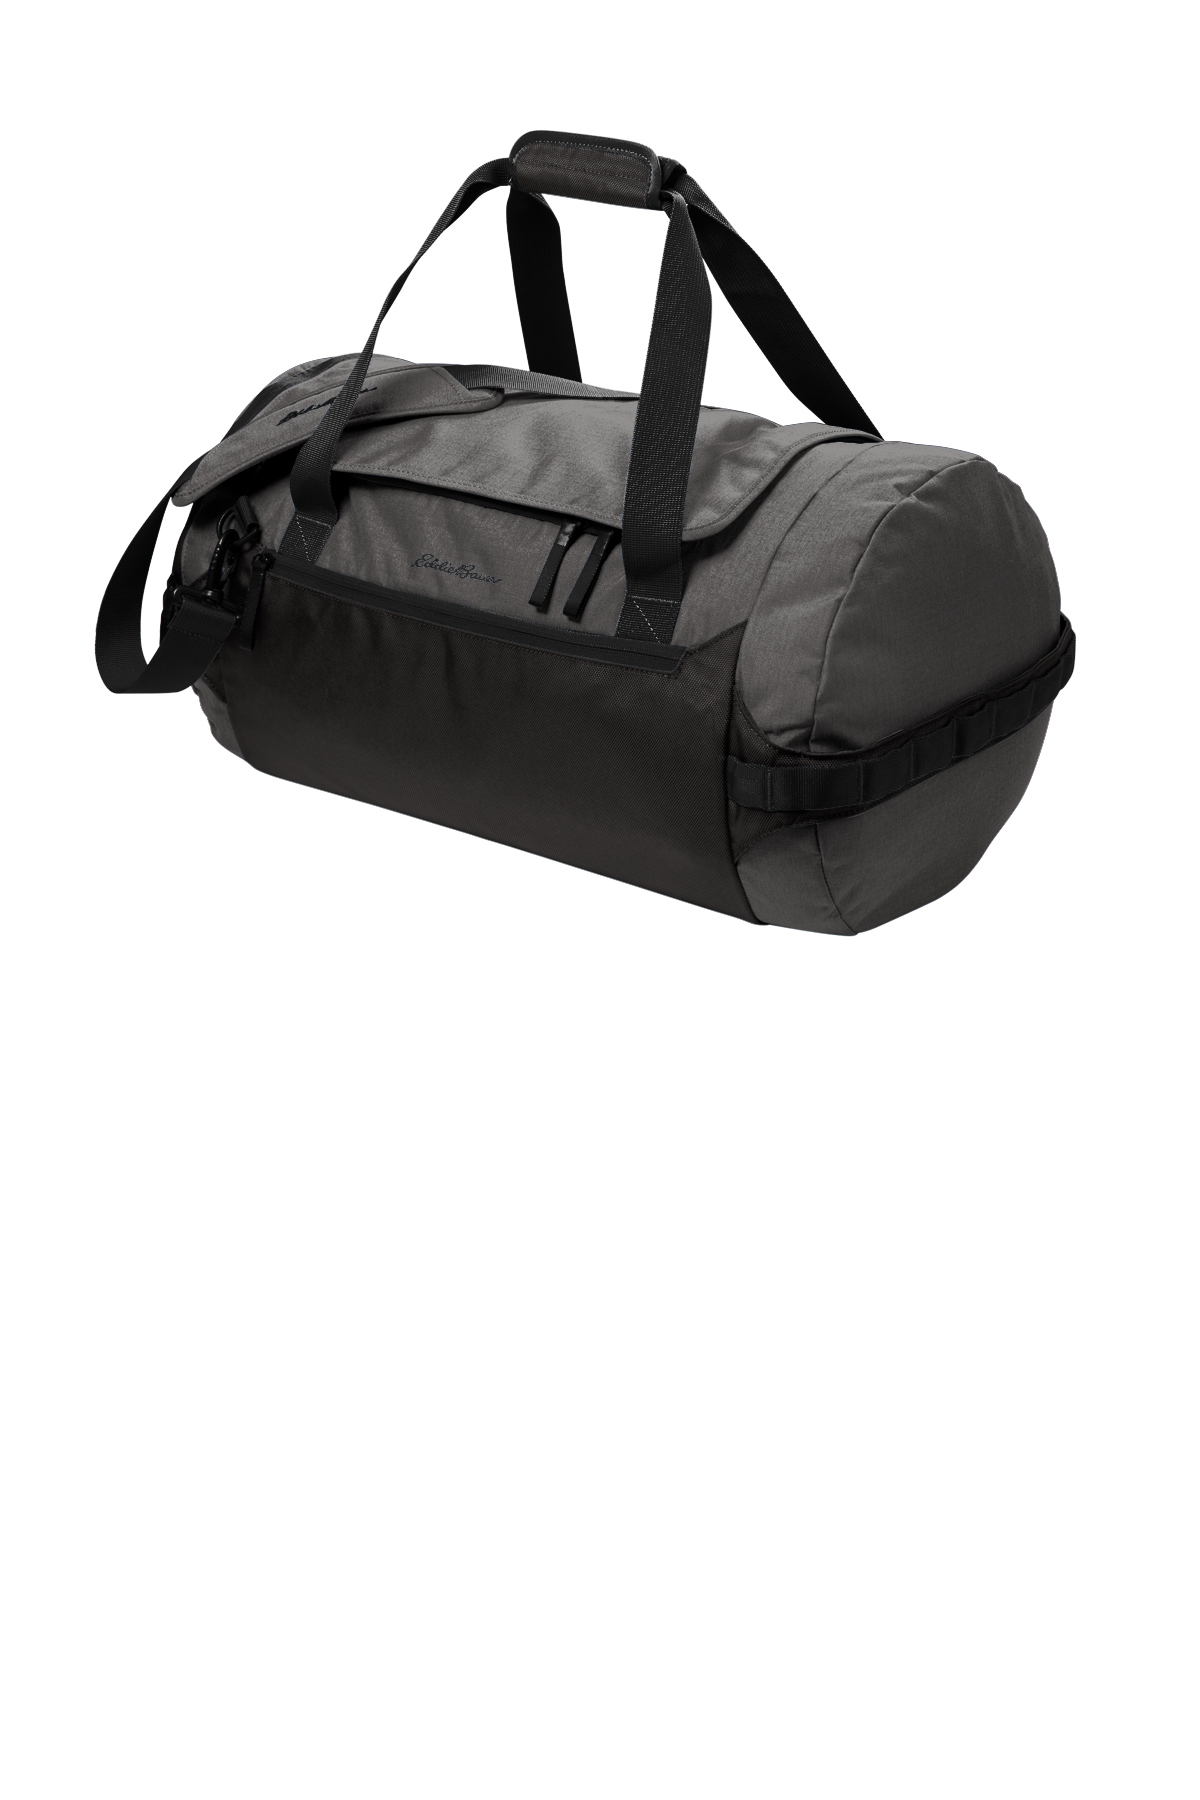 Eddie Bauer Tour Duffel | Product | Company Casuals